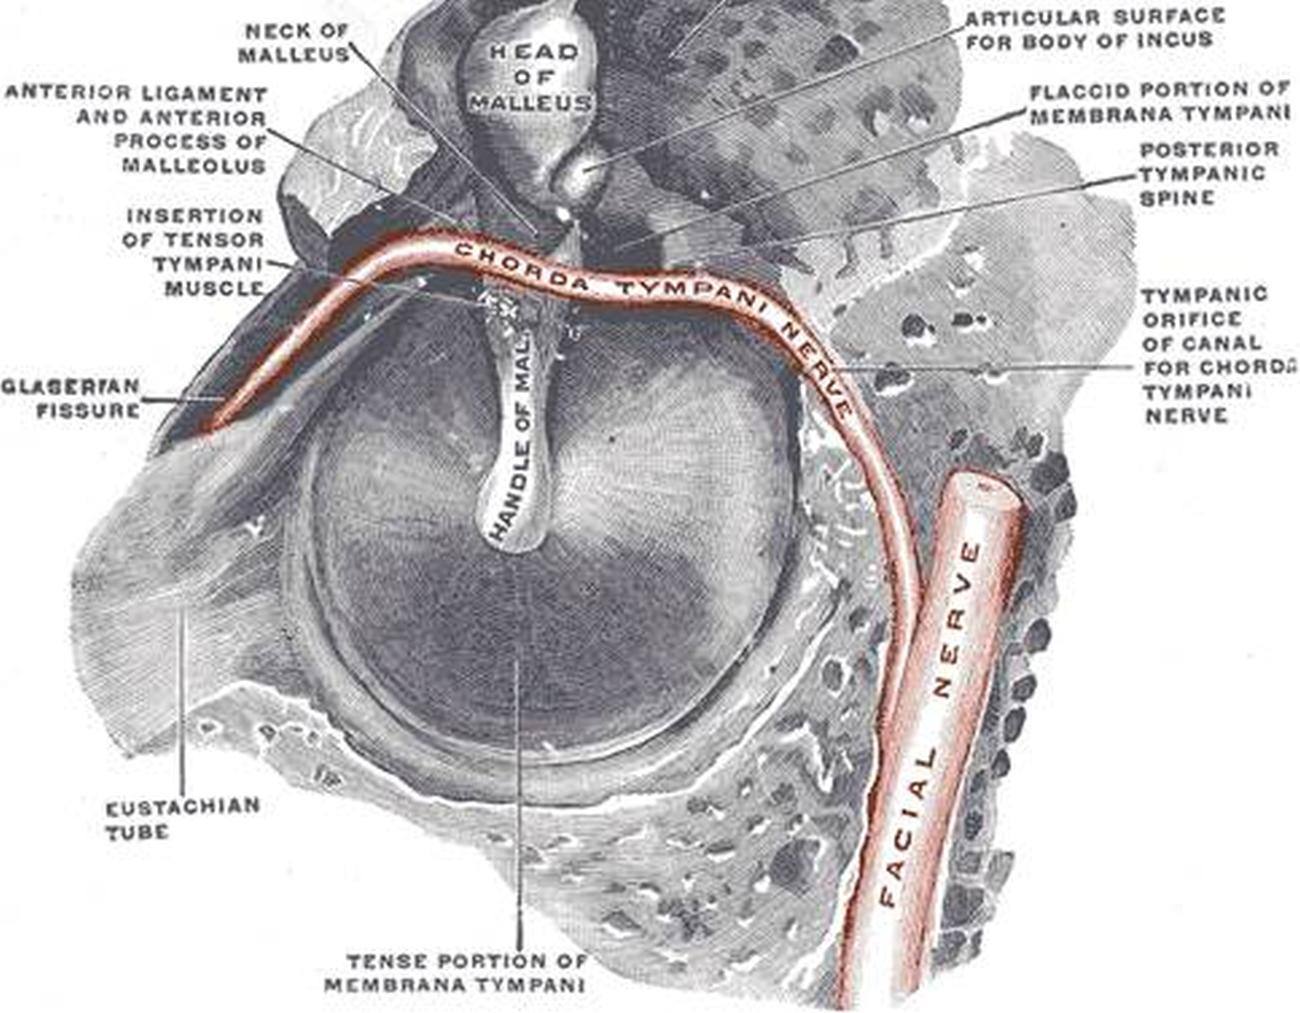 Pictures Of Chorda Tympani Nerve